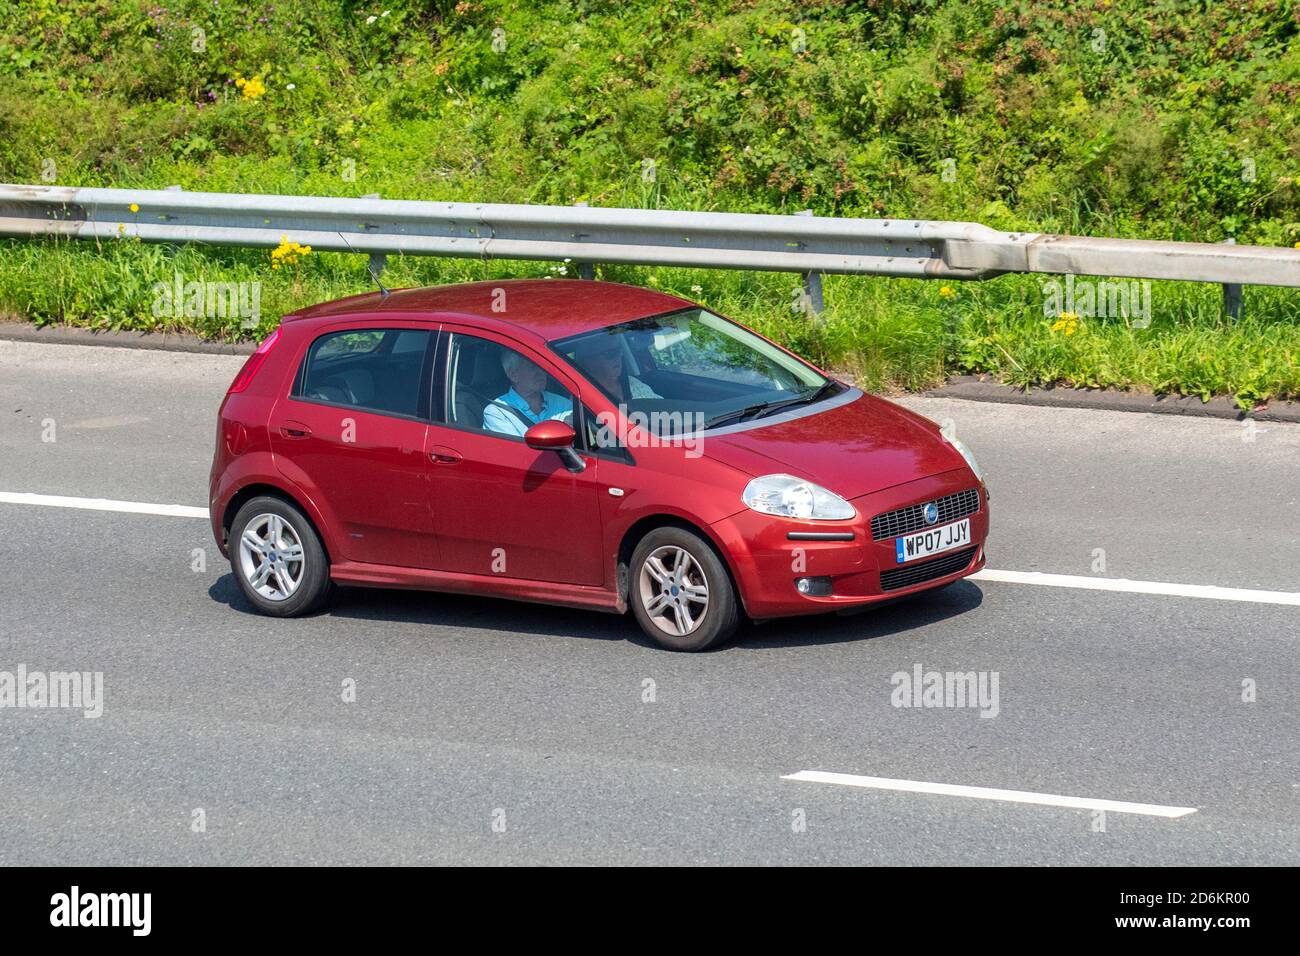 Red Fiat Punto High Resolution Stock Photography and Images - Alamy